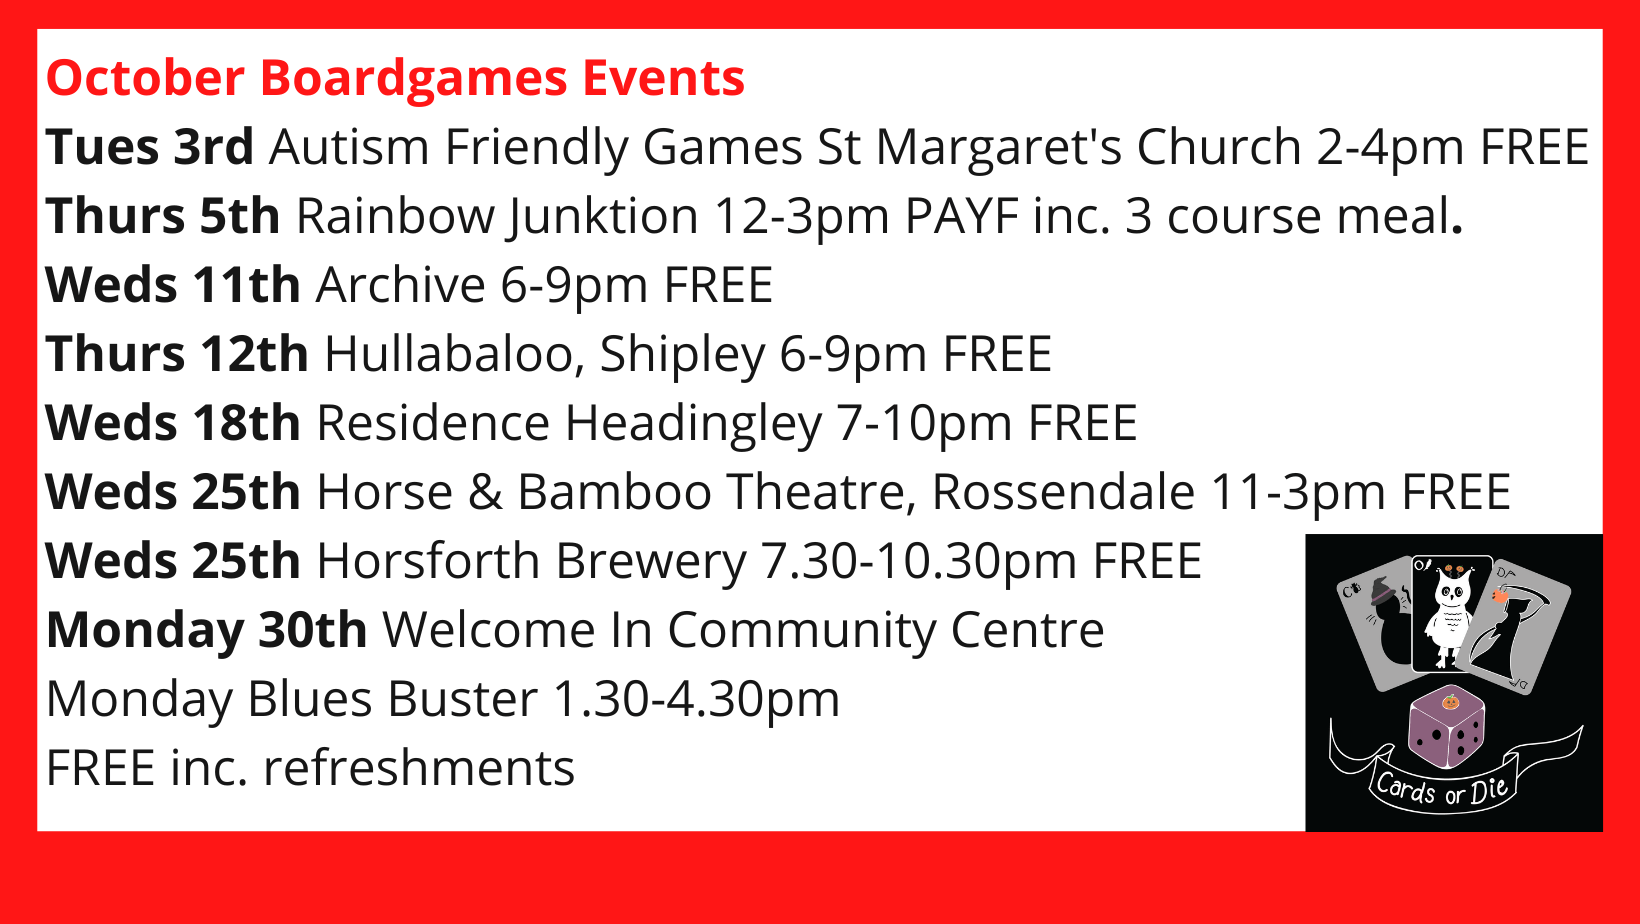 October Boardgames Events Tues 3rd Autism Friendly Games St Margaret's Church 2-4pm FREE Thurs 5th Rainbow Junktion 12-3pm PAYF inc. 3 course meal. Weds 11th Archive 6-9pm FREE Thurs 12th Hullabaloo, Shipley 6-9pm FREE Weds 18th Residence Headingley 7-10pm FREE Weds 25th Horse & Bamboo Theatre, Rossendale 11-3pm FREE Weds 25th Horsforth Brewery 7.30-10.30pm FREE Monday 30th Welcome In Community Centre Monday Blues Buster 1.30-4.30pm FREE inc. refreshments